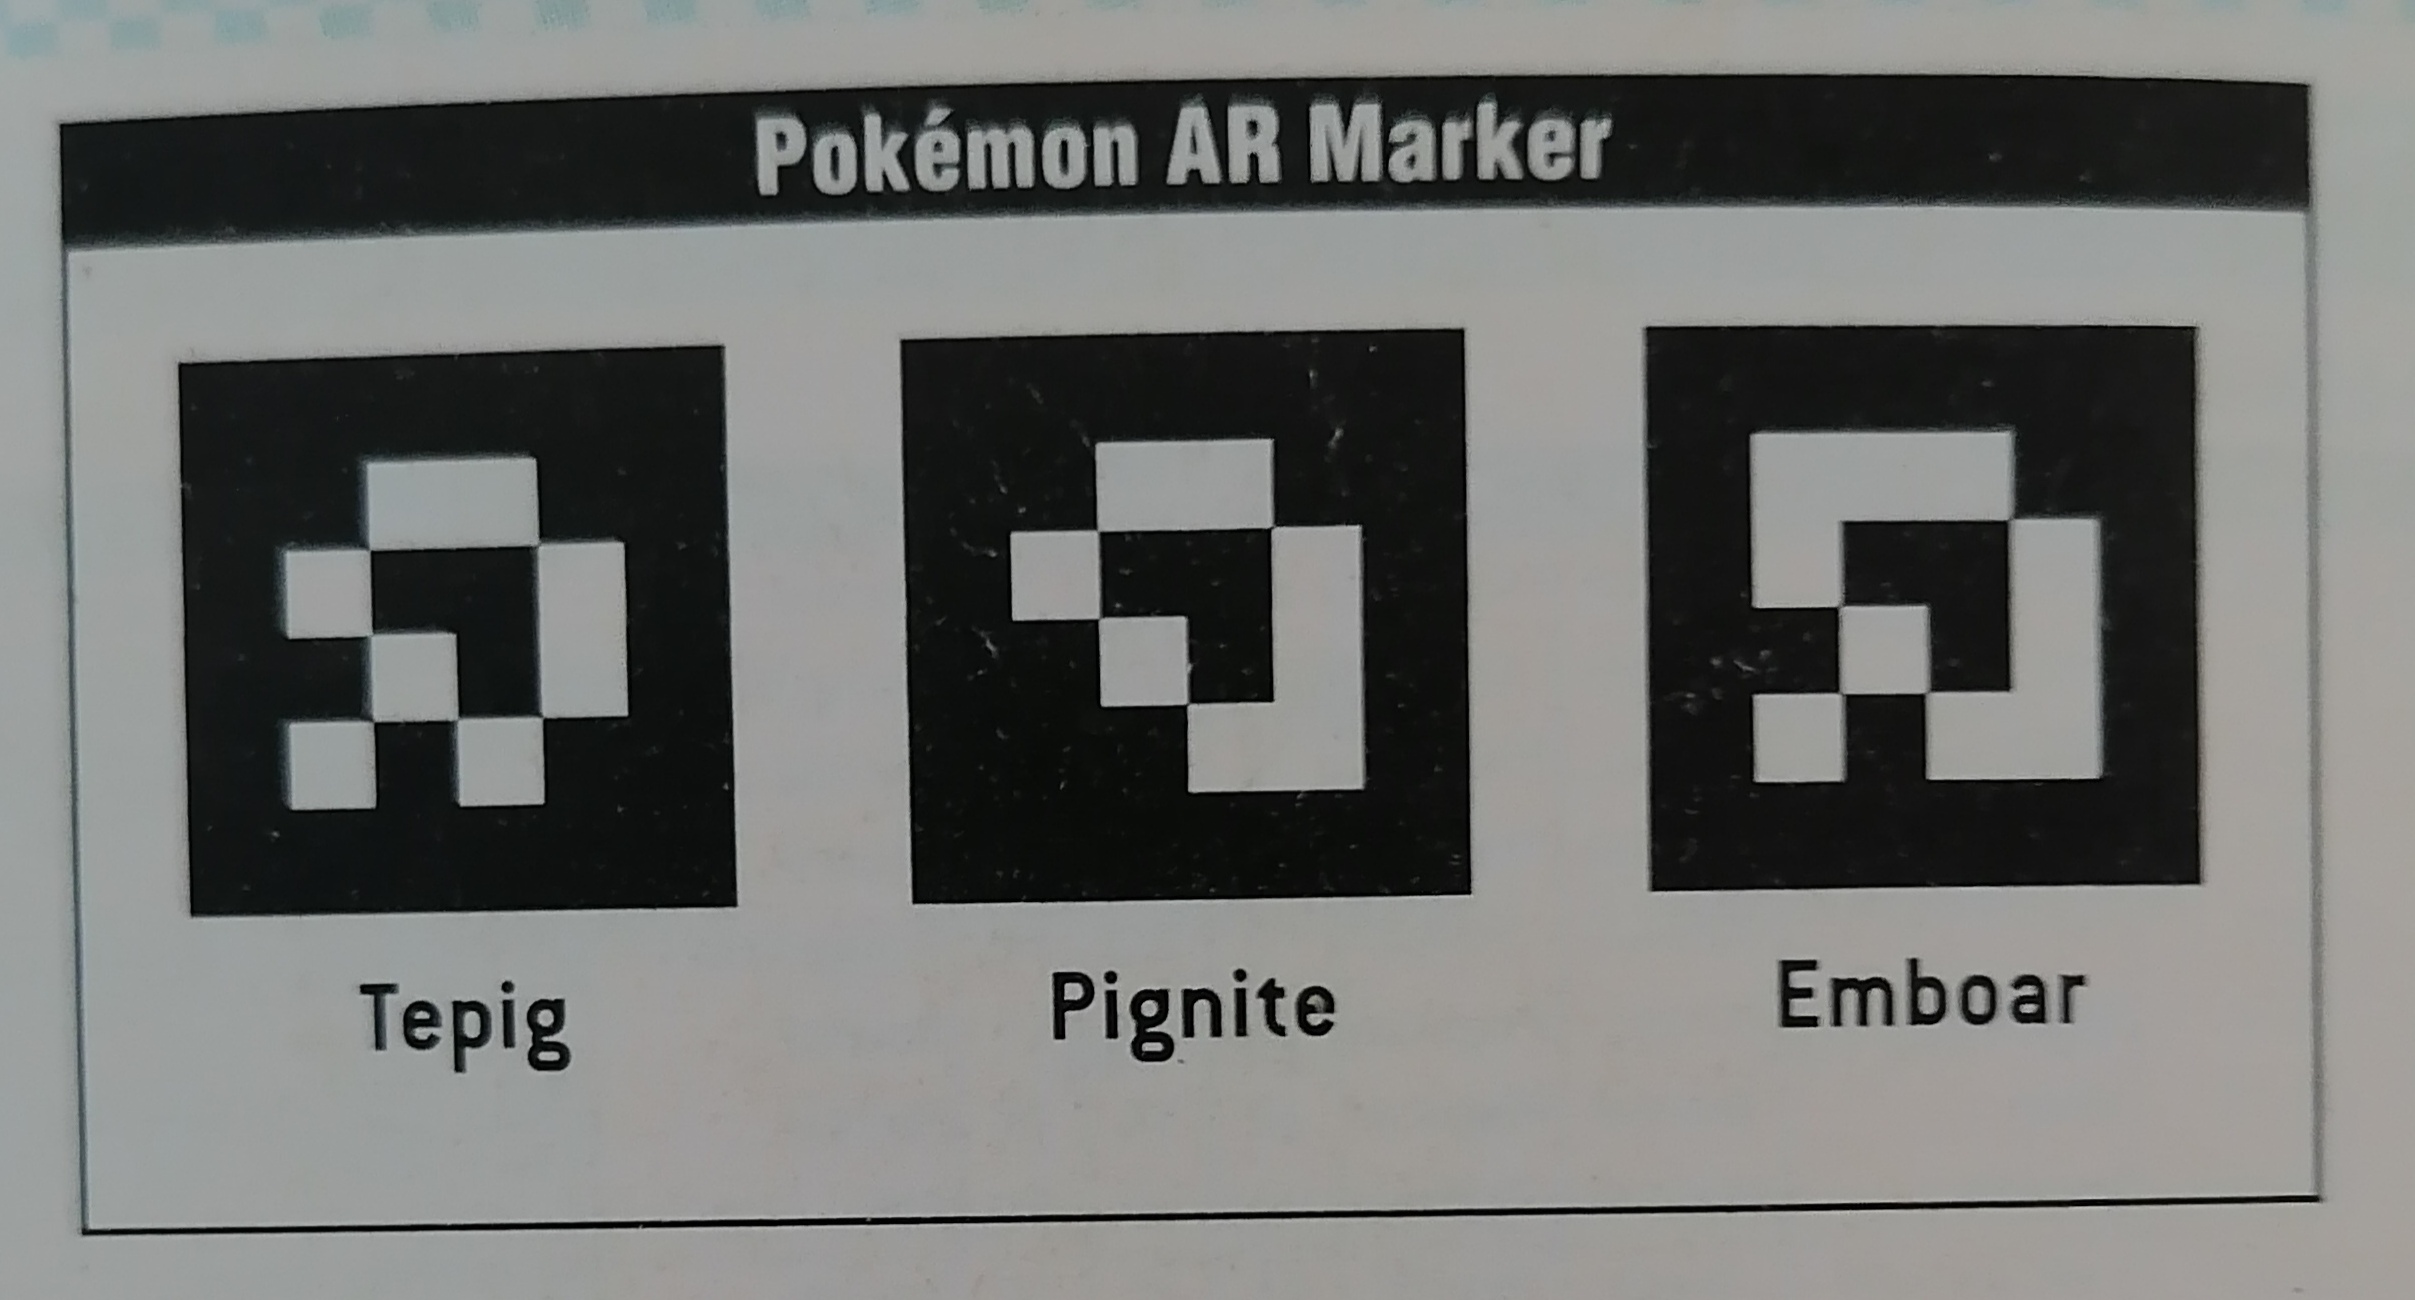 Photo of the ar markers of tepig, pignite, and emboar, which have similar shapes